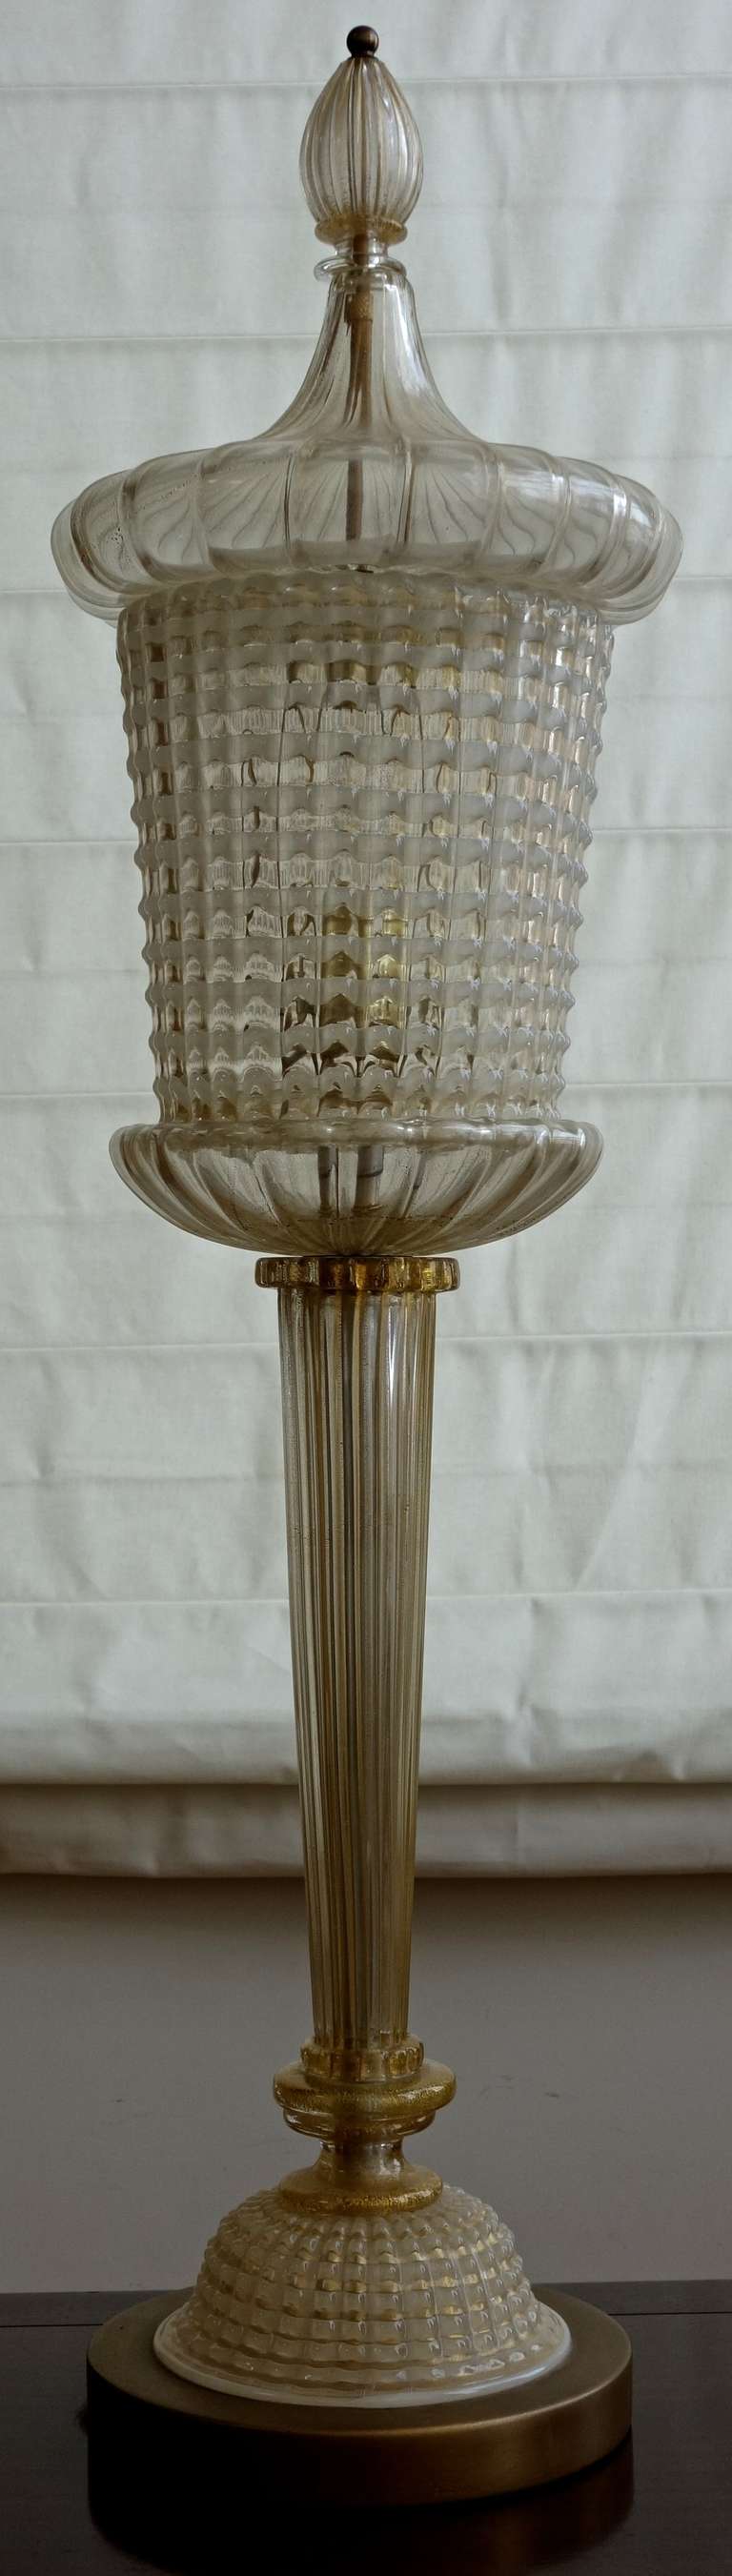 An absolutely beautiful and noble looking Venetian glass table lamp by Marbro.

Base measures 8